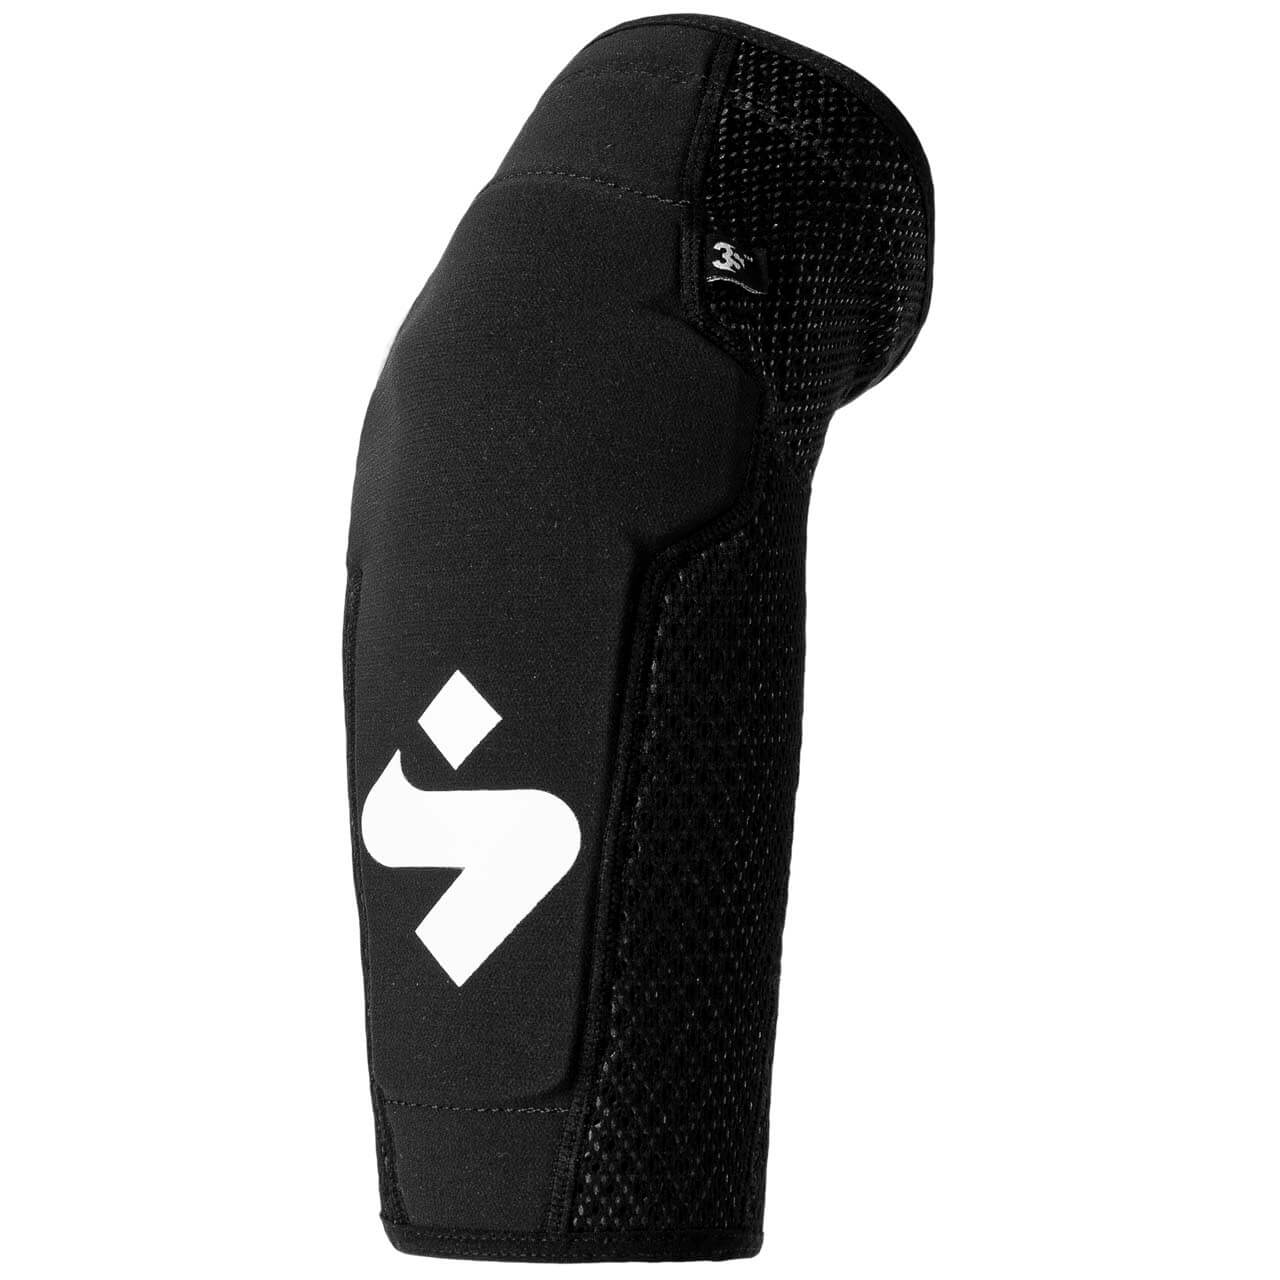 Sweet Protection Knee Guards Light - Black, XL